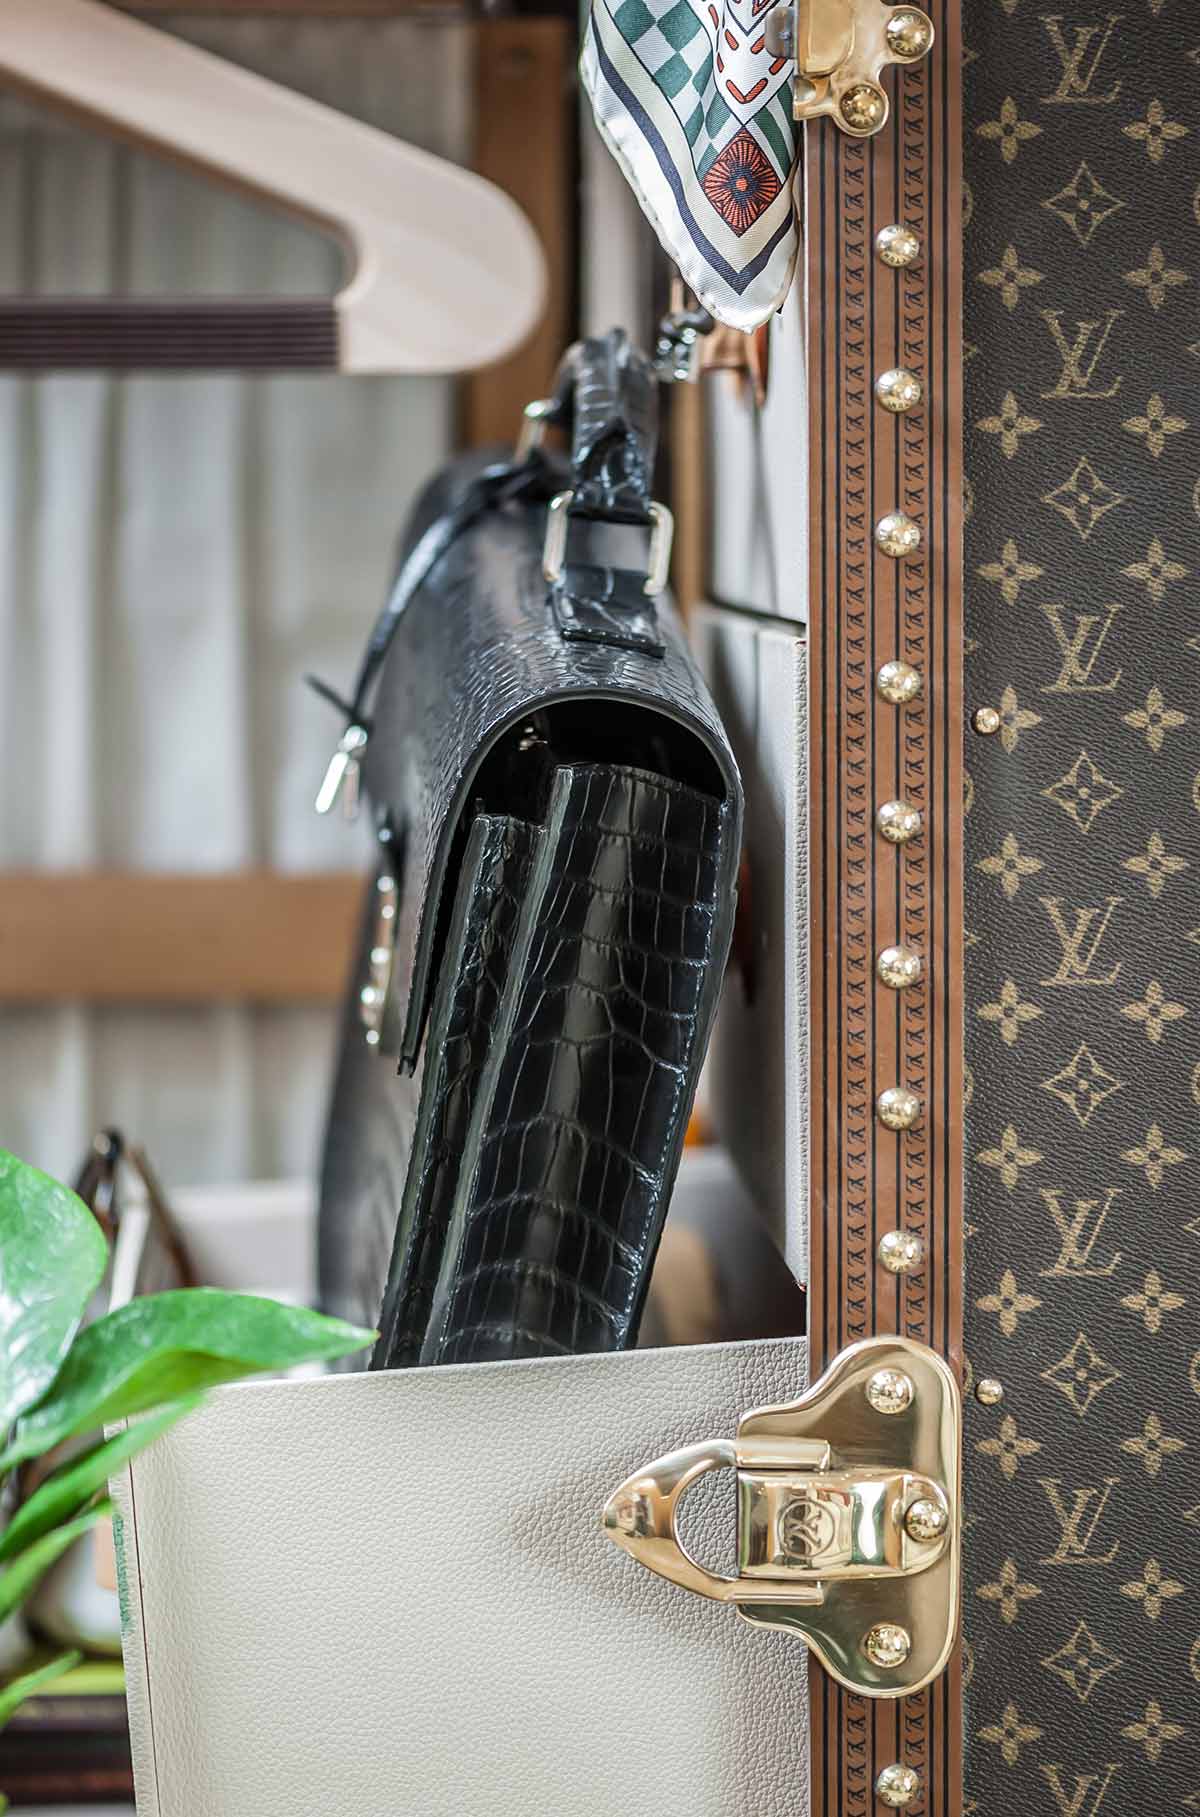 Louis Vuitton Greenbelt now carries exotic leathers